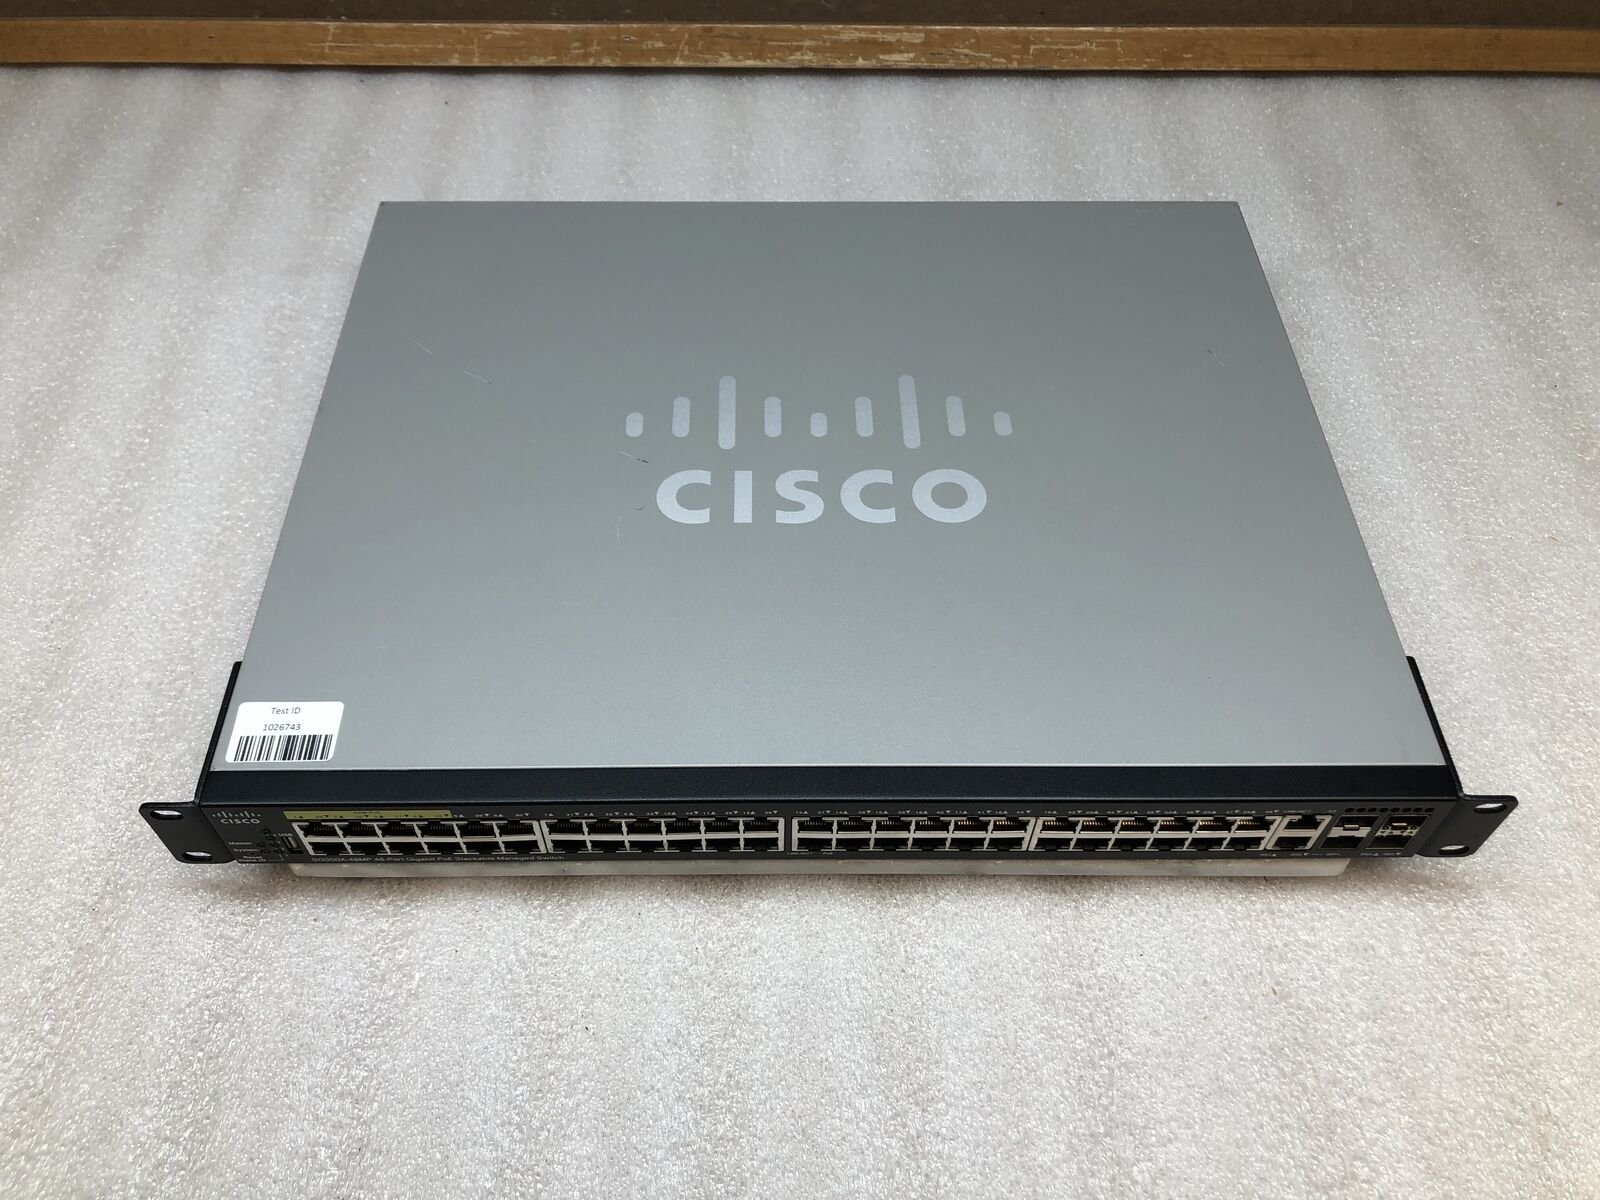 Cisco SG350X-48MP-K9 V02 Small Business Managed Stackable Gig Switch -TEST/RESET